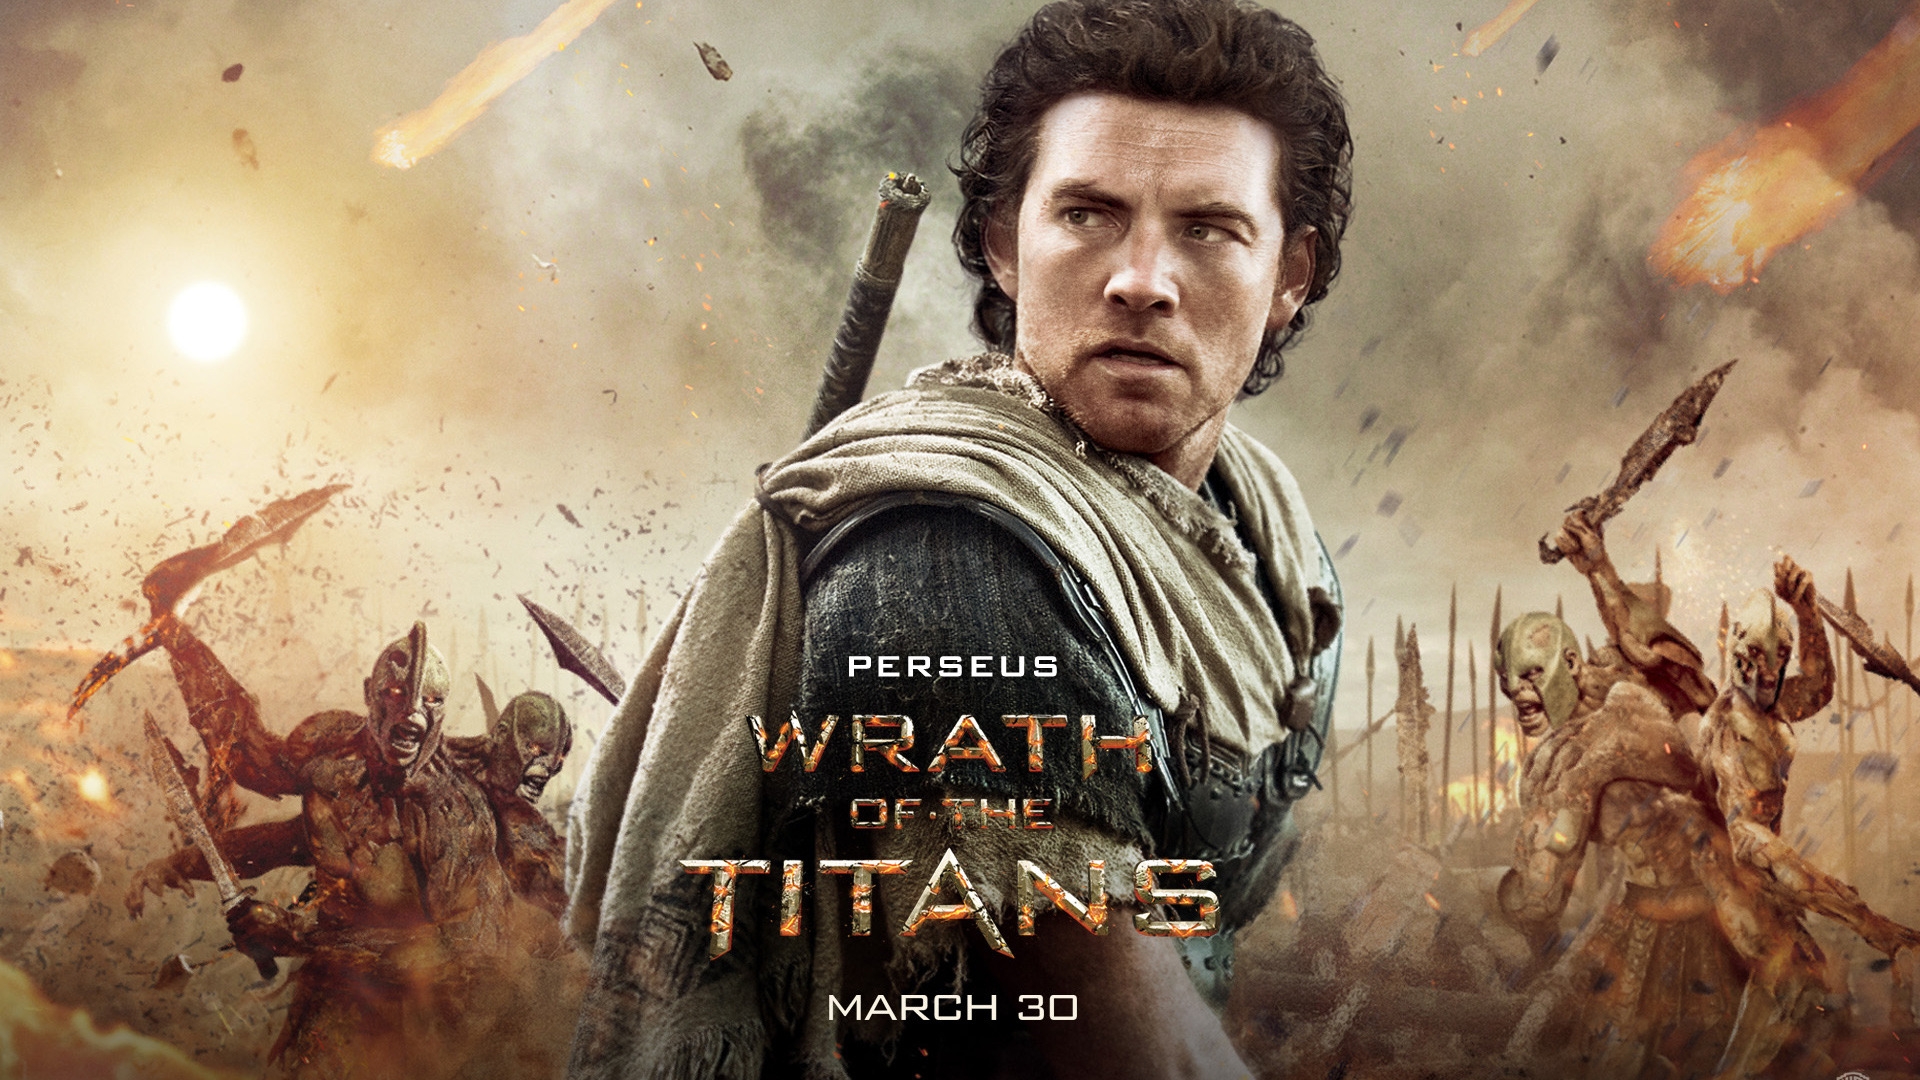 Perseus Wrath of the Titans for 1920 x 1080 HDTV 1080p resolution